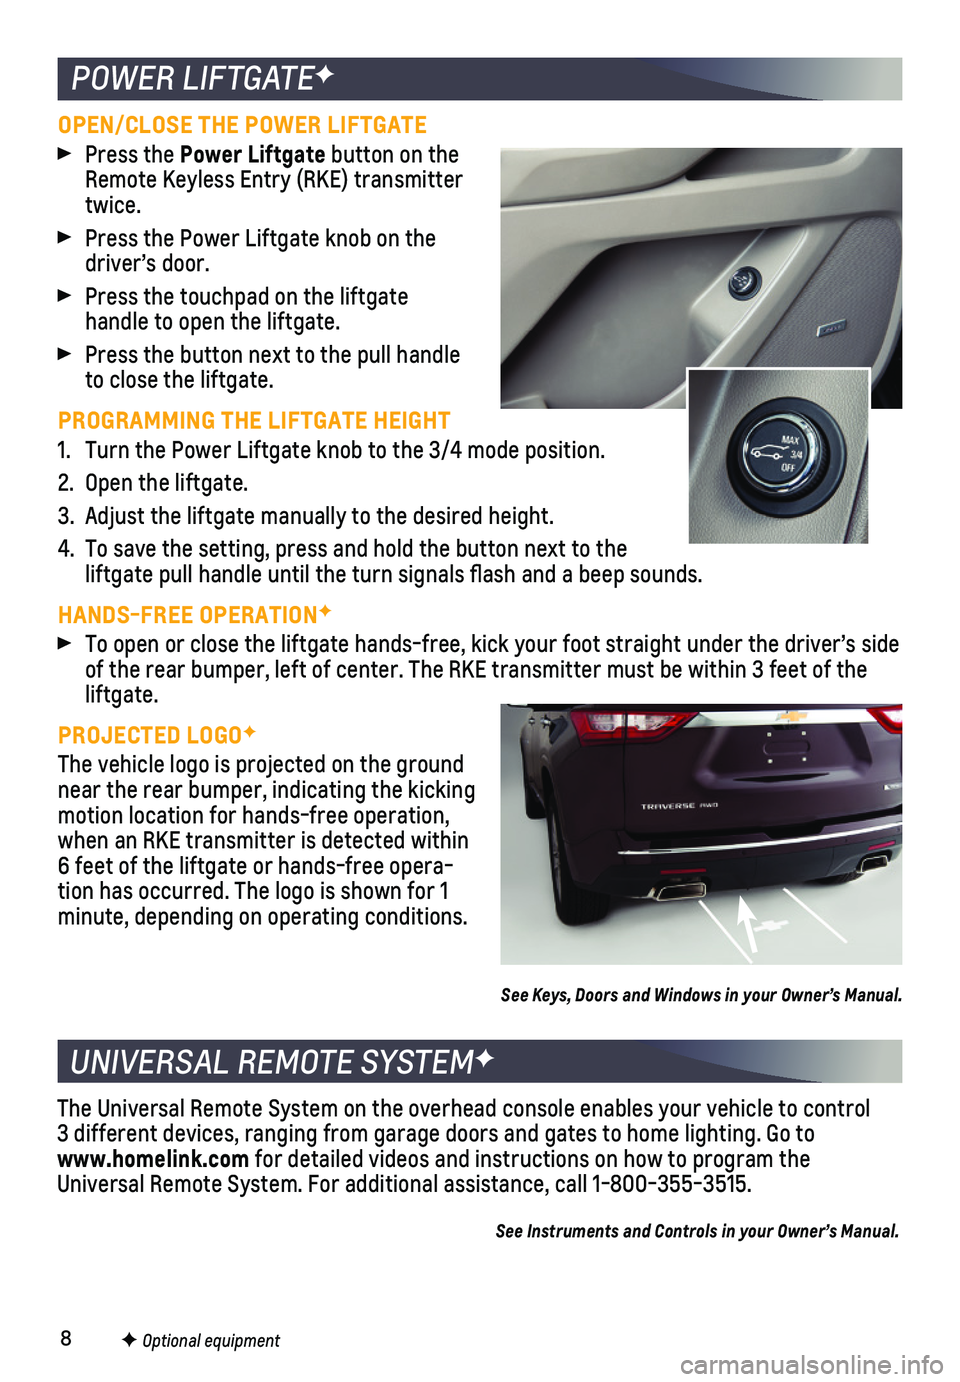 CHEVROLET TRAVERSE 2019  Get To Know Guide 8
UNIVERSAL REMOTE SYSTEMF
The Universal Remote System on the overhead console enables your vehicle\
 to control  3 different devices, ranging from garage doors and gates to home lightin\
g. Go to  ww